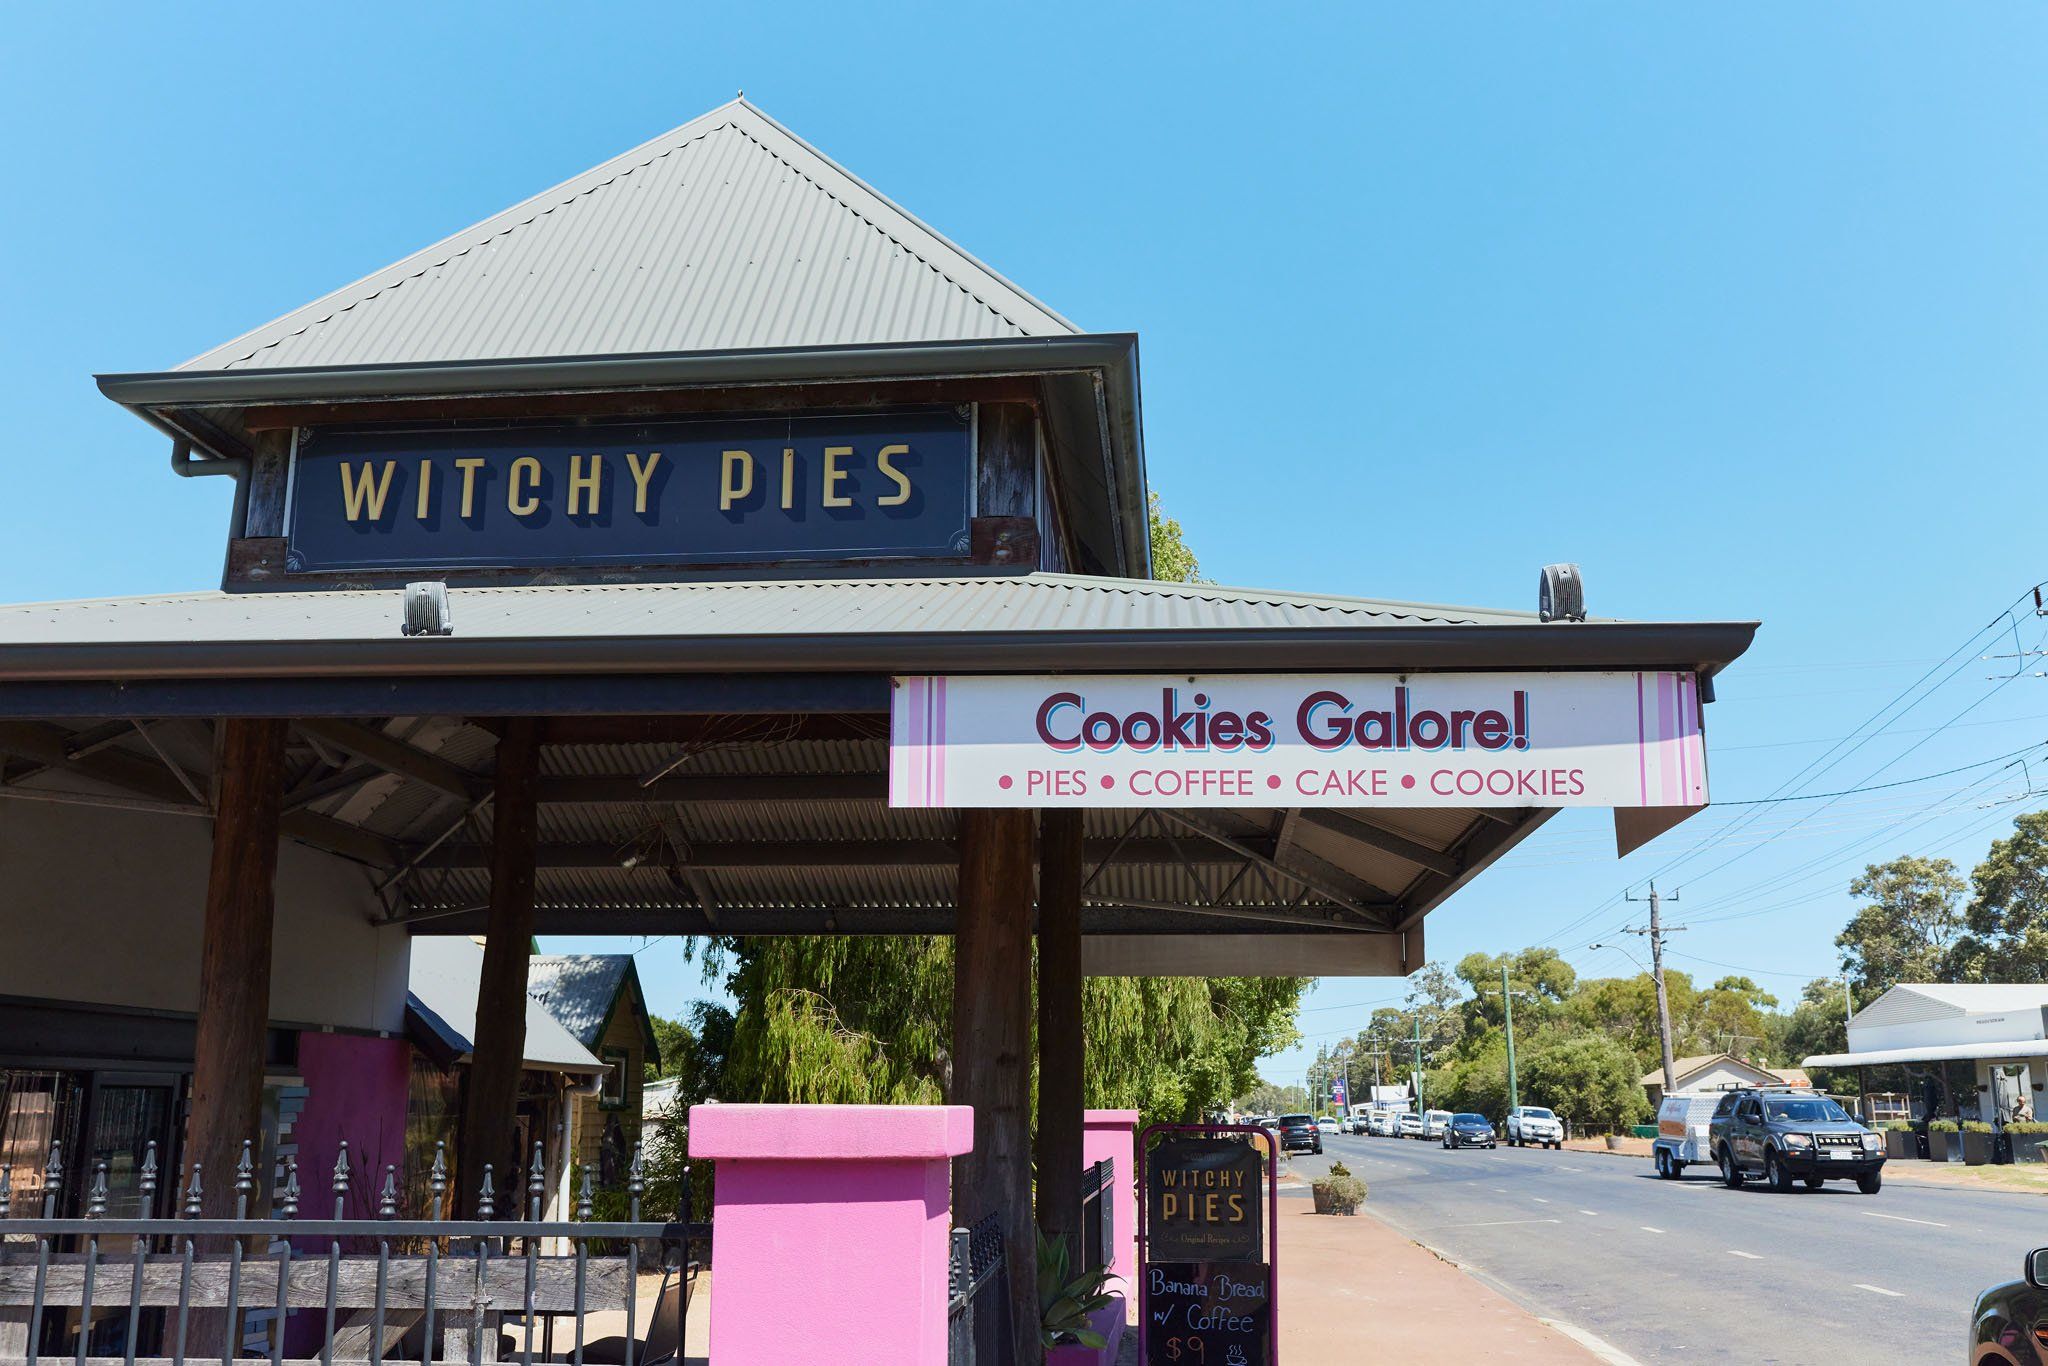 Witchy Pies and Cookies Galore in Witchcliffe. Credit Tim Campbell